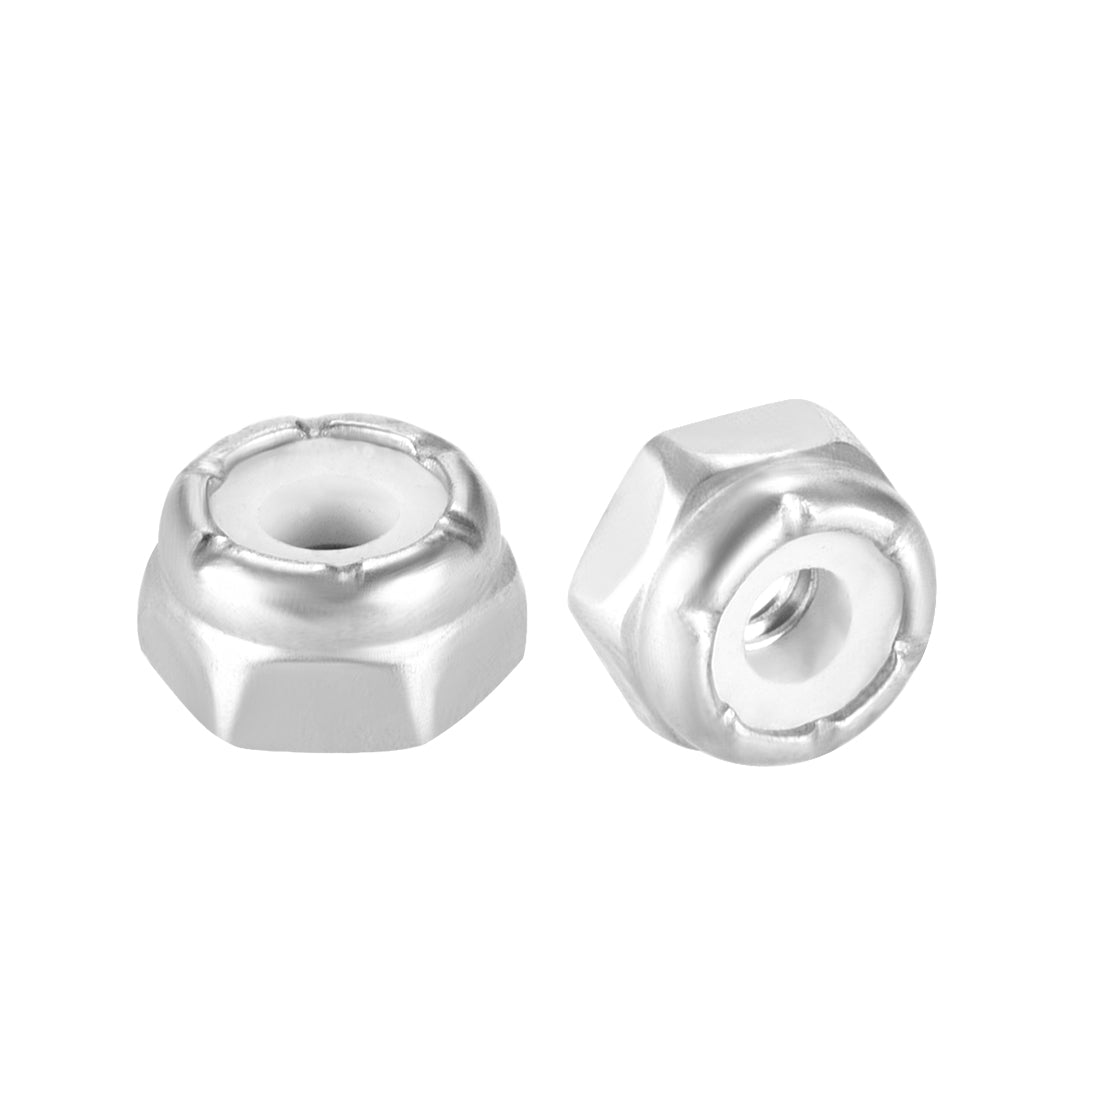 uxcell Uxcell 4#-40 Hex Lock Nuts Stainless Steel Nylon Insert Self-Lock Nuts, 10Pcs Silver